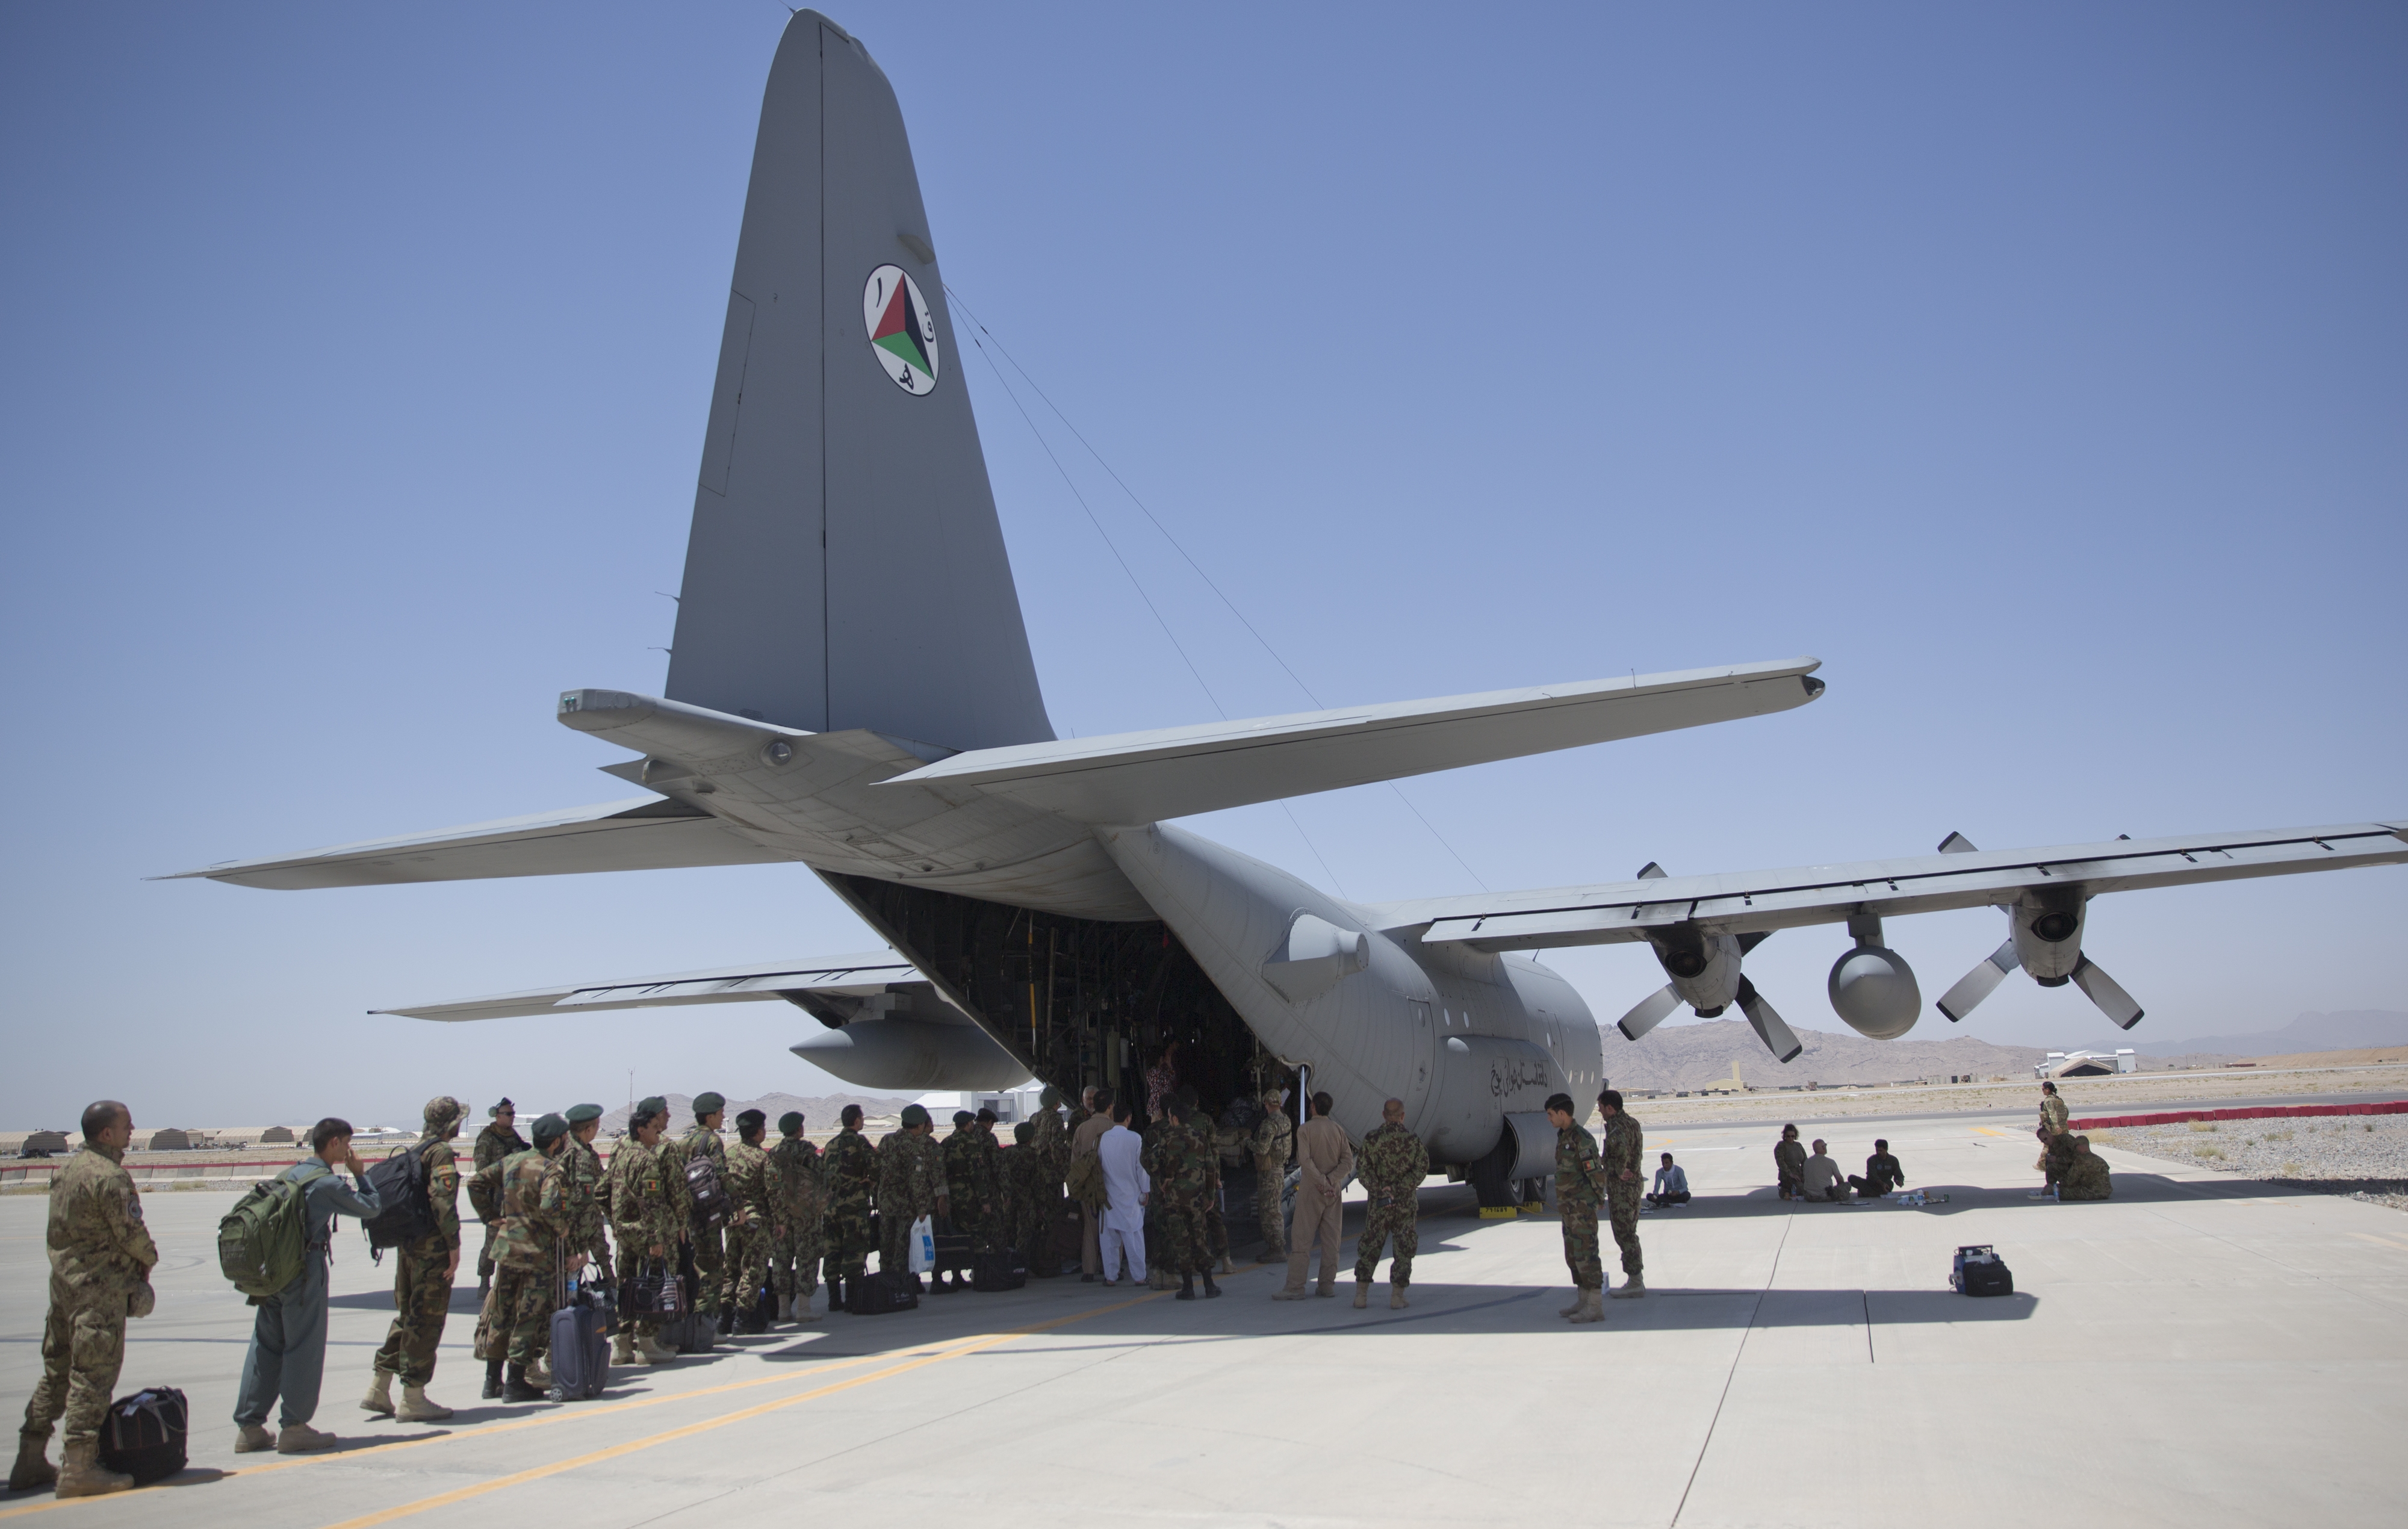  Tuesday, Aug. 18, 2015 photo, Afghan National Army soldiers line up to get into a C-130 Hercules, at Kandahar Air Base, in Kandahar, Afghanistan. Photo: AP